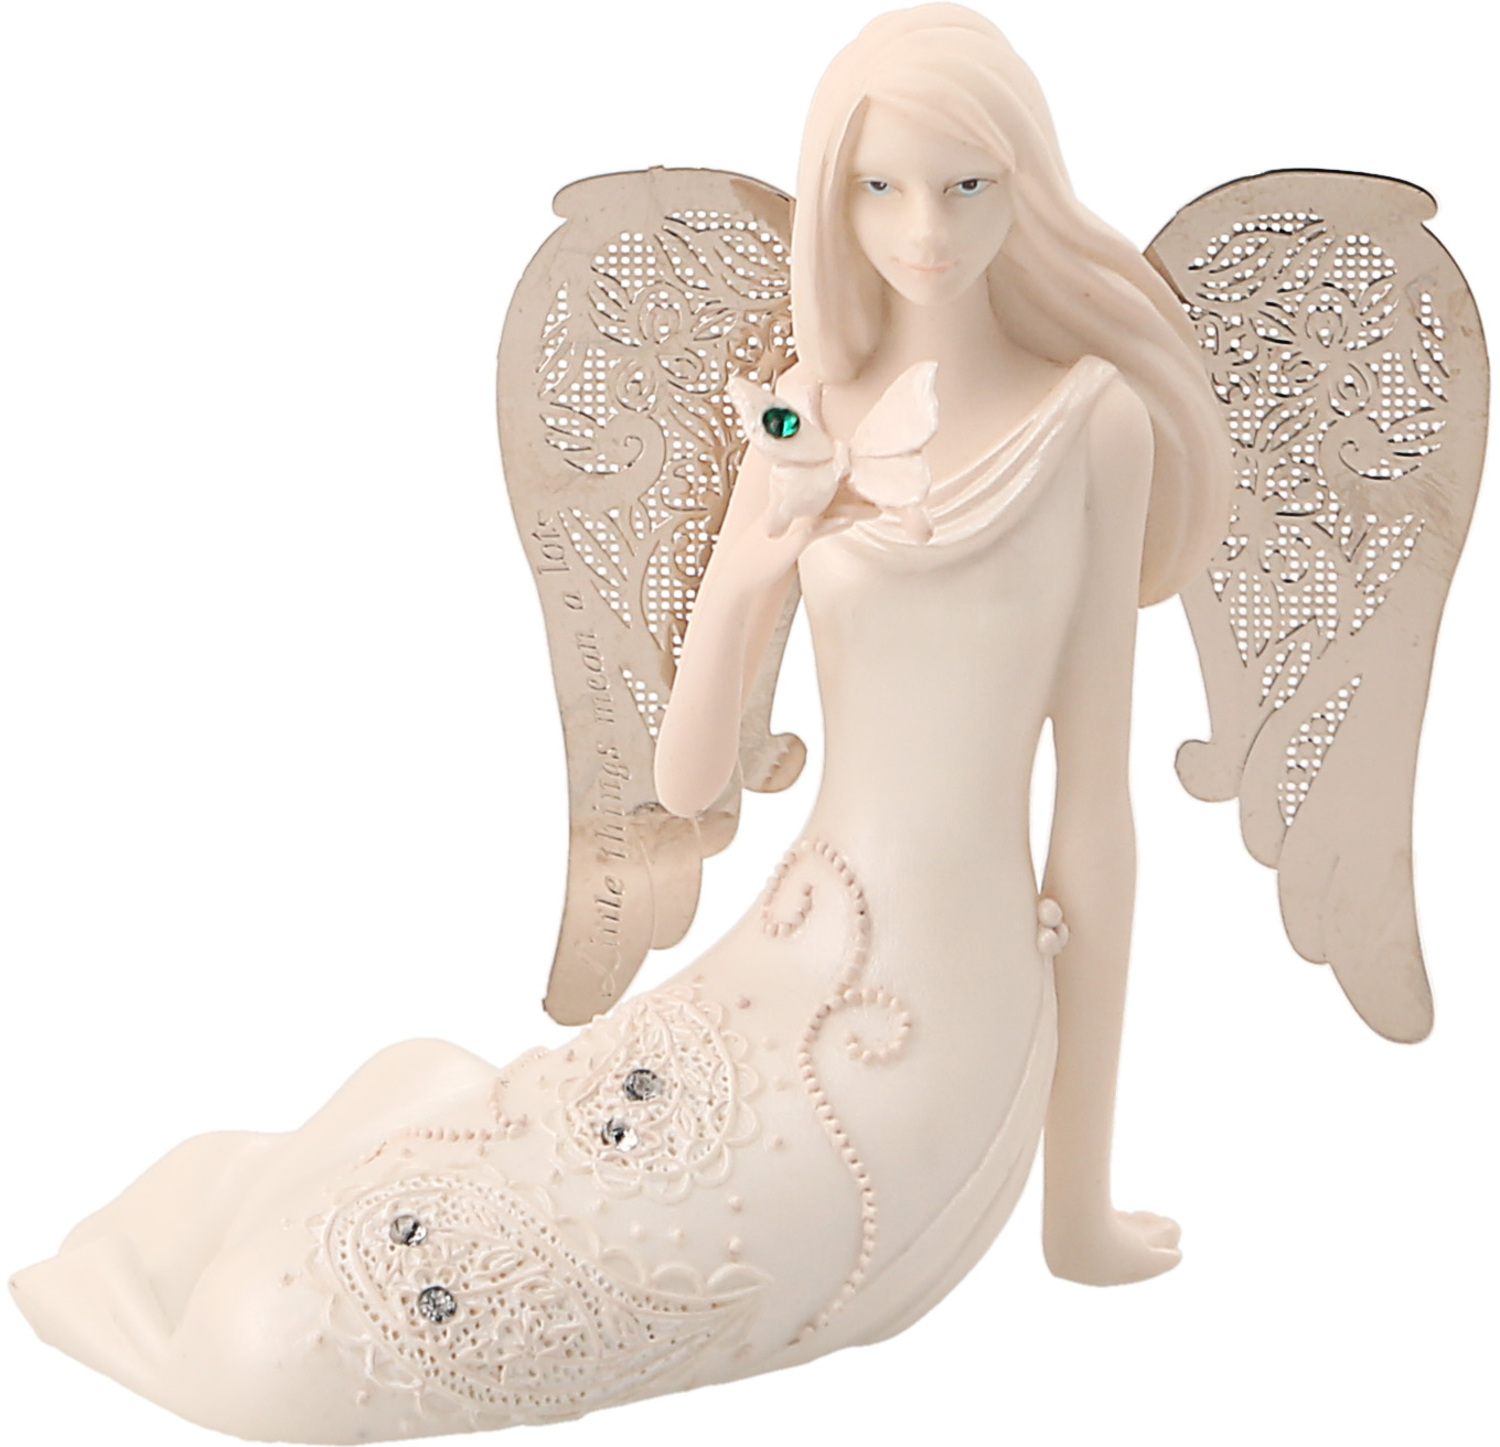 May Birthstone Angel by Little Things Mean A Lot - May Birthstone Angel - 3.5" May Angel with Emerald Butterfly